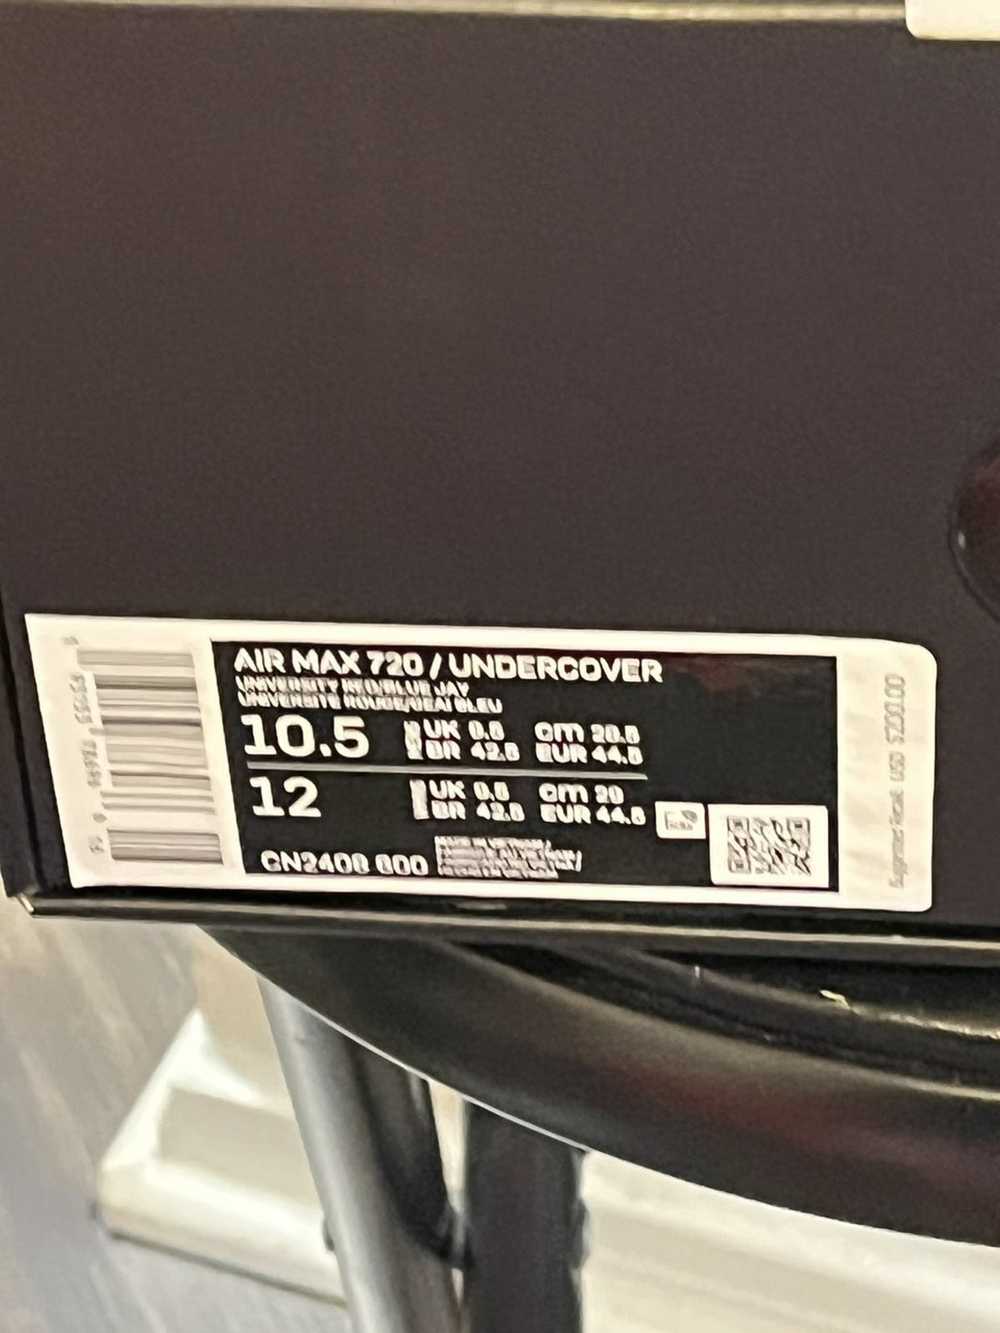 Nike Air max 720 undercover - image 5